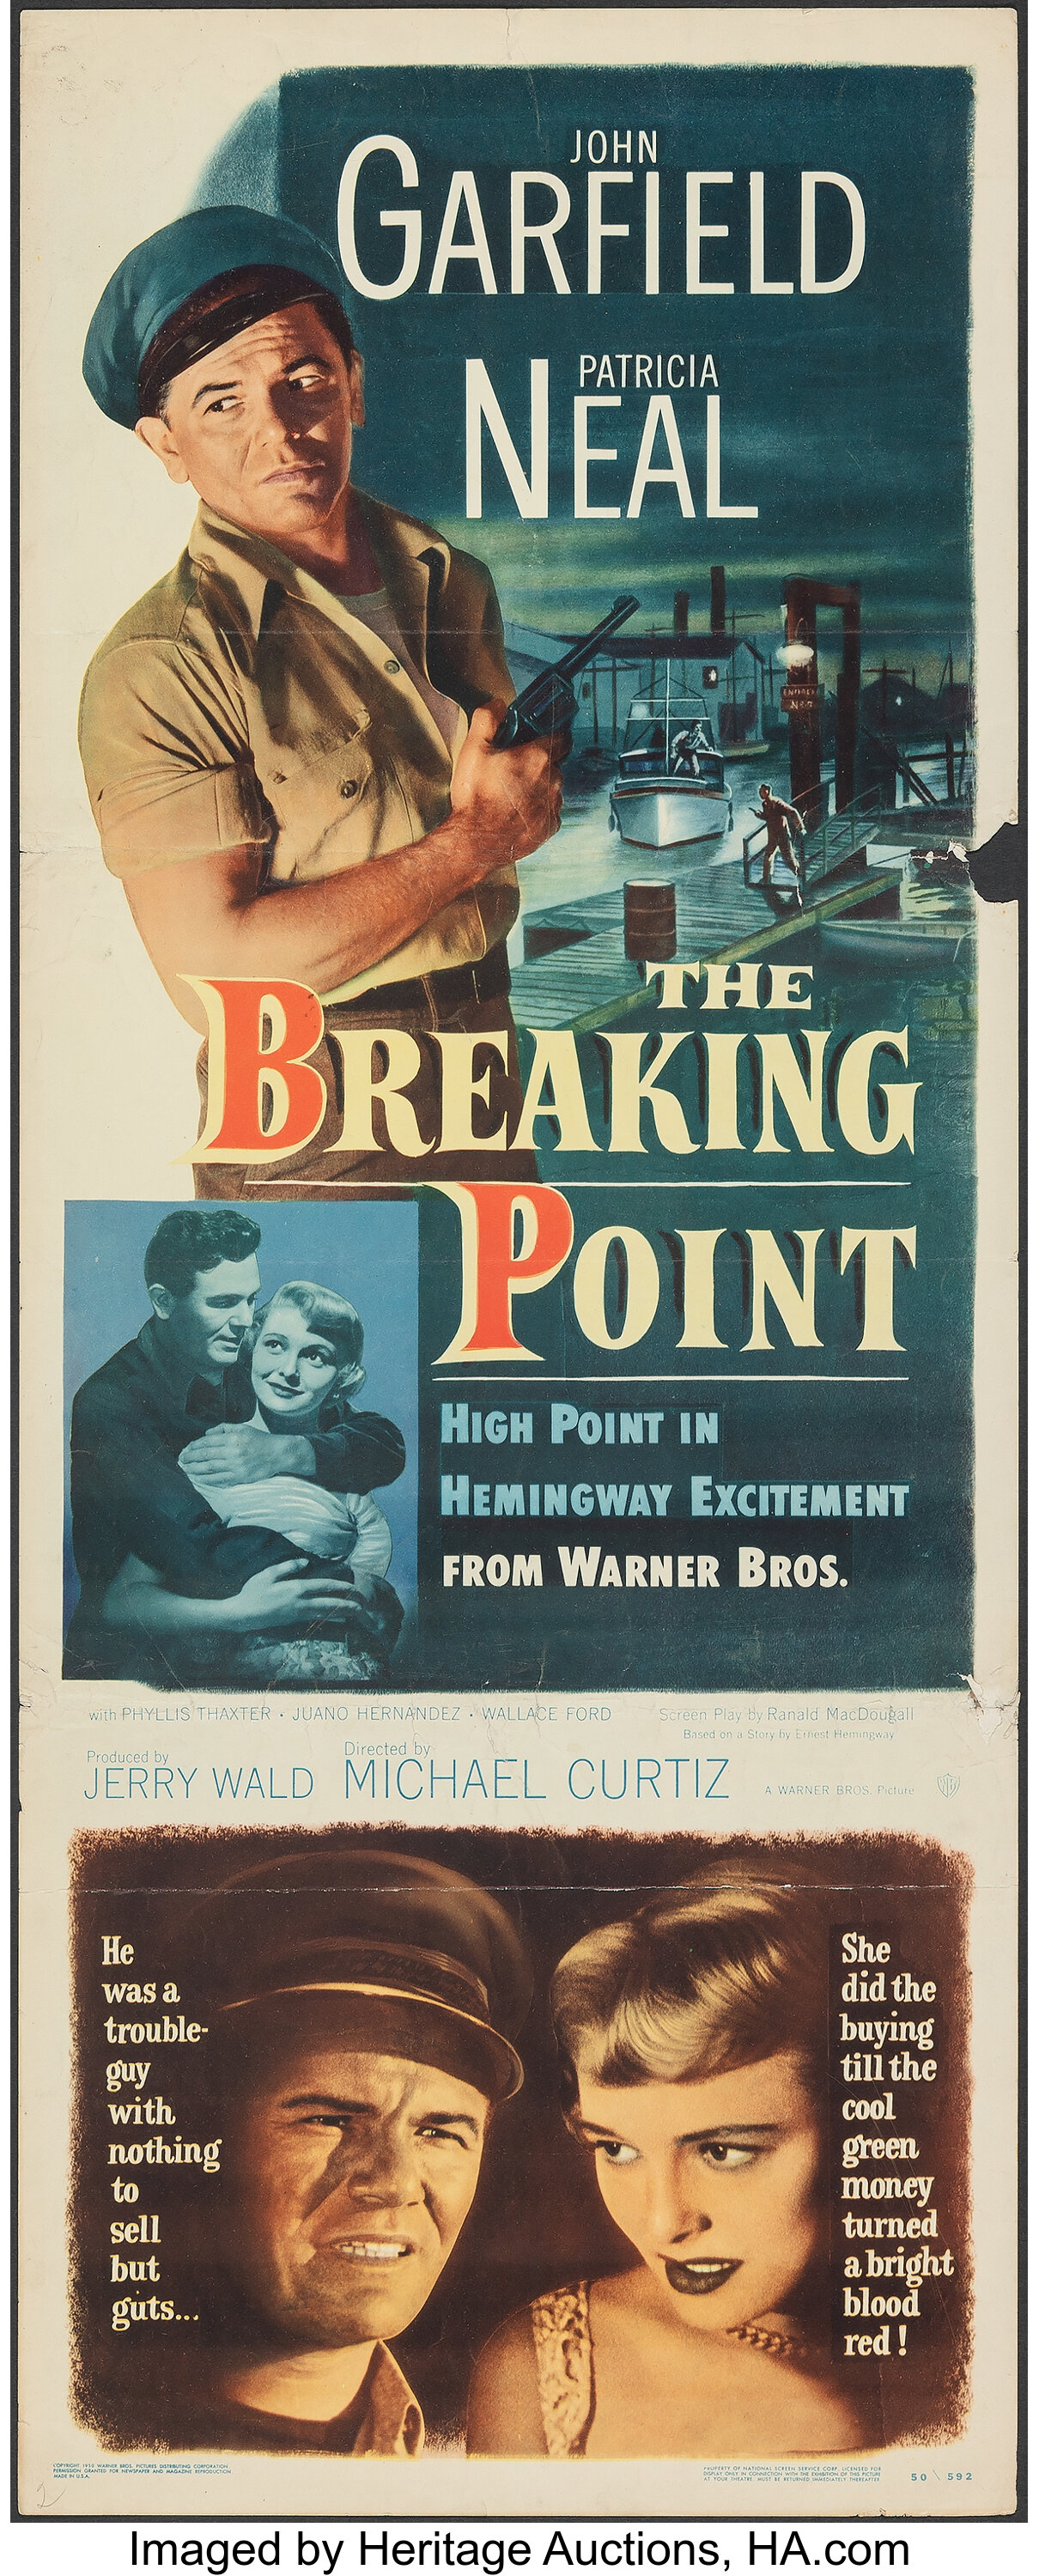 Out of the Vaults: The Breaking Point (1950)